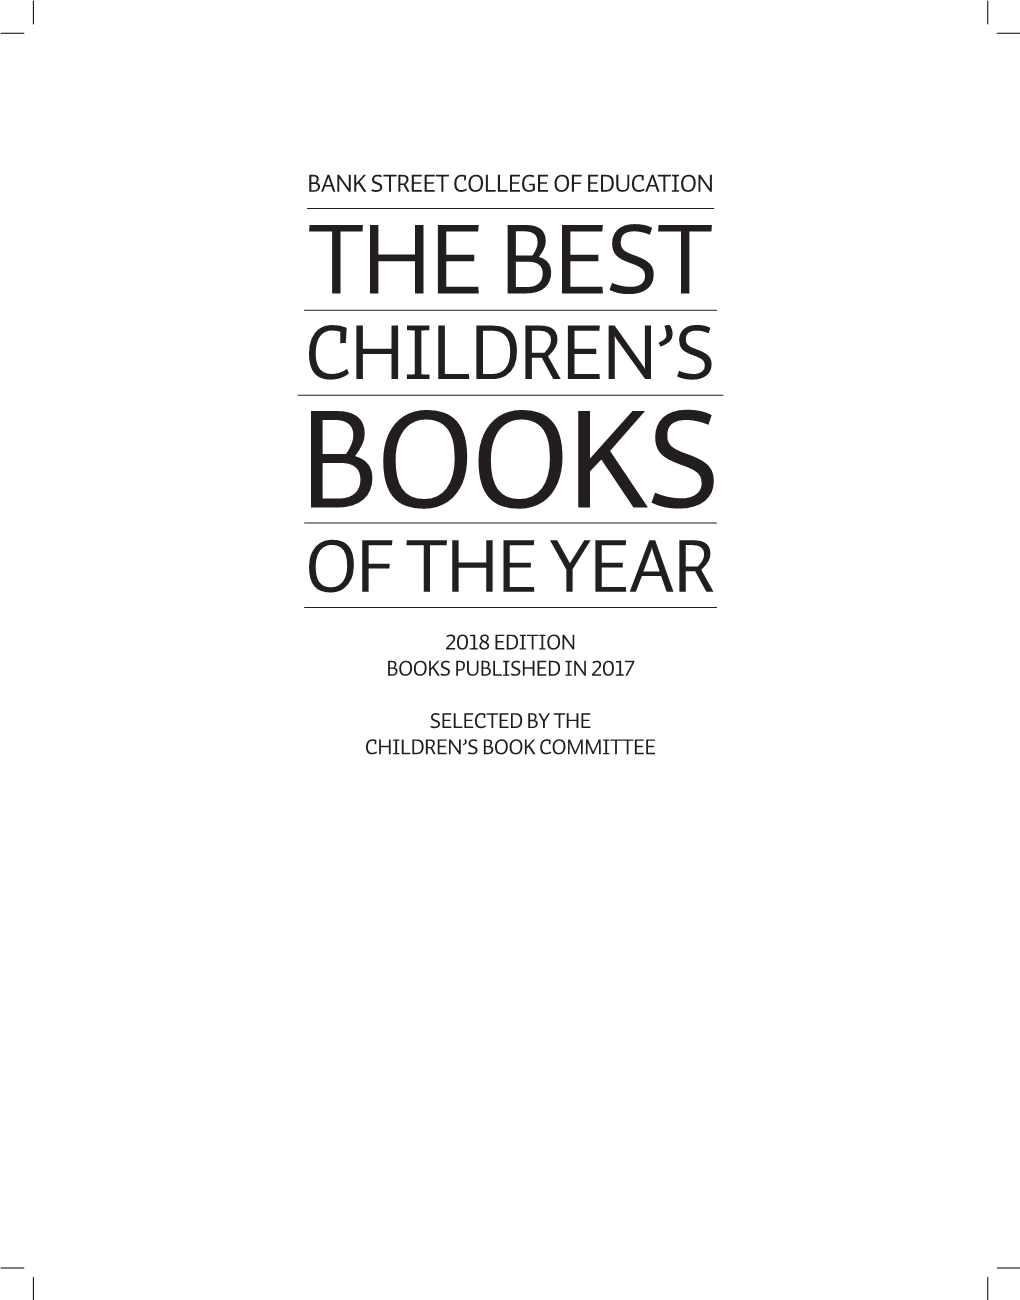 The Best Children’S Books of the Year 2018 Edition Ofbooks the Published Year in 2017 Selected by the Children’S Book Committee the Children’S Book Committee